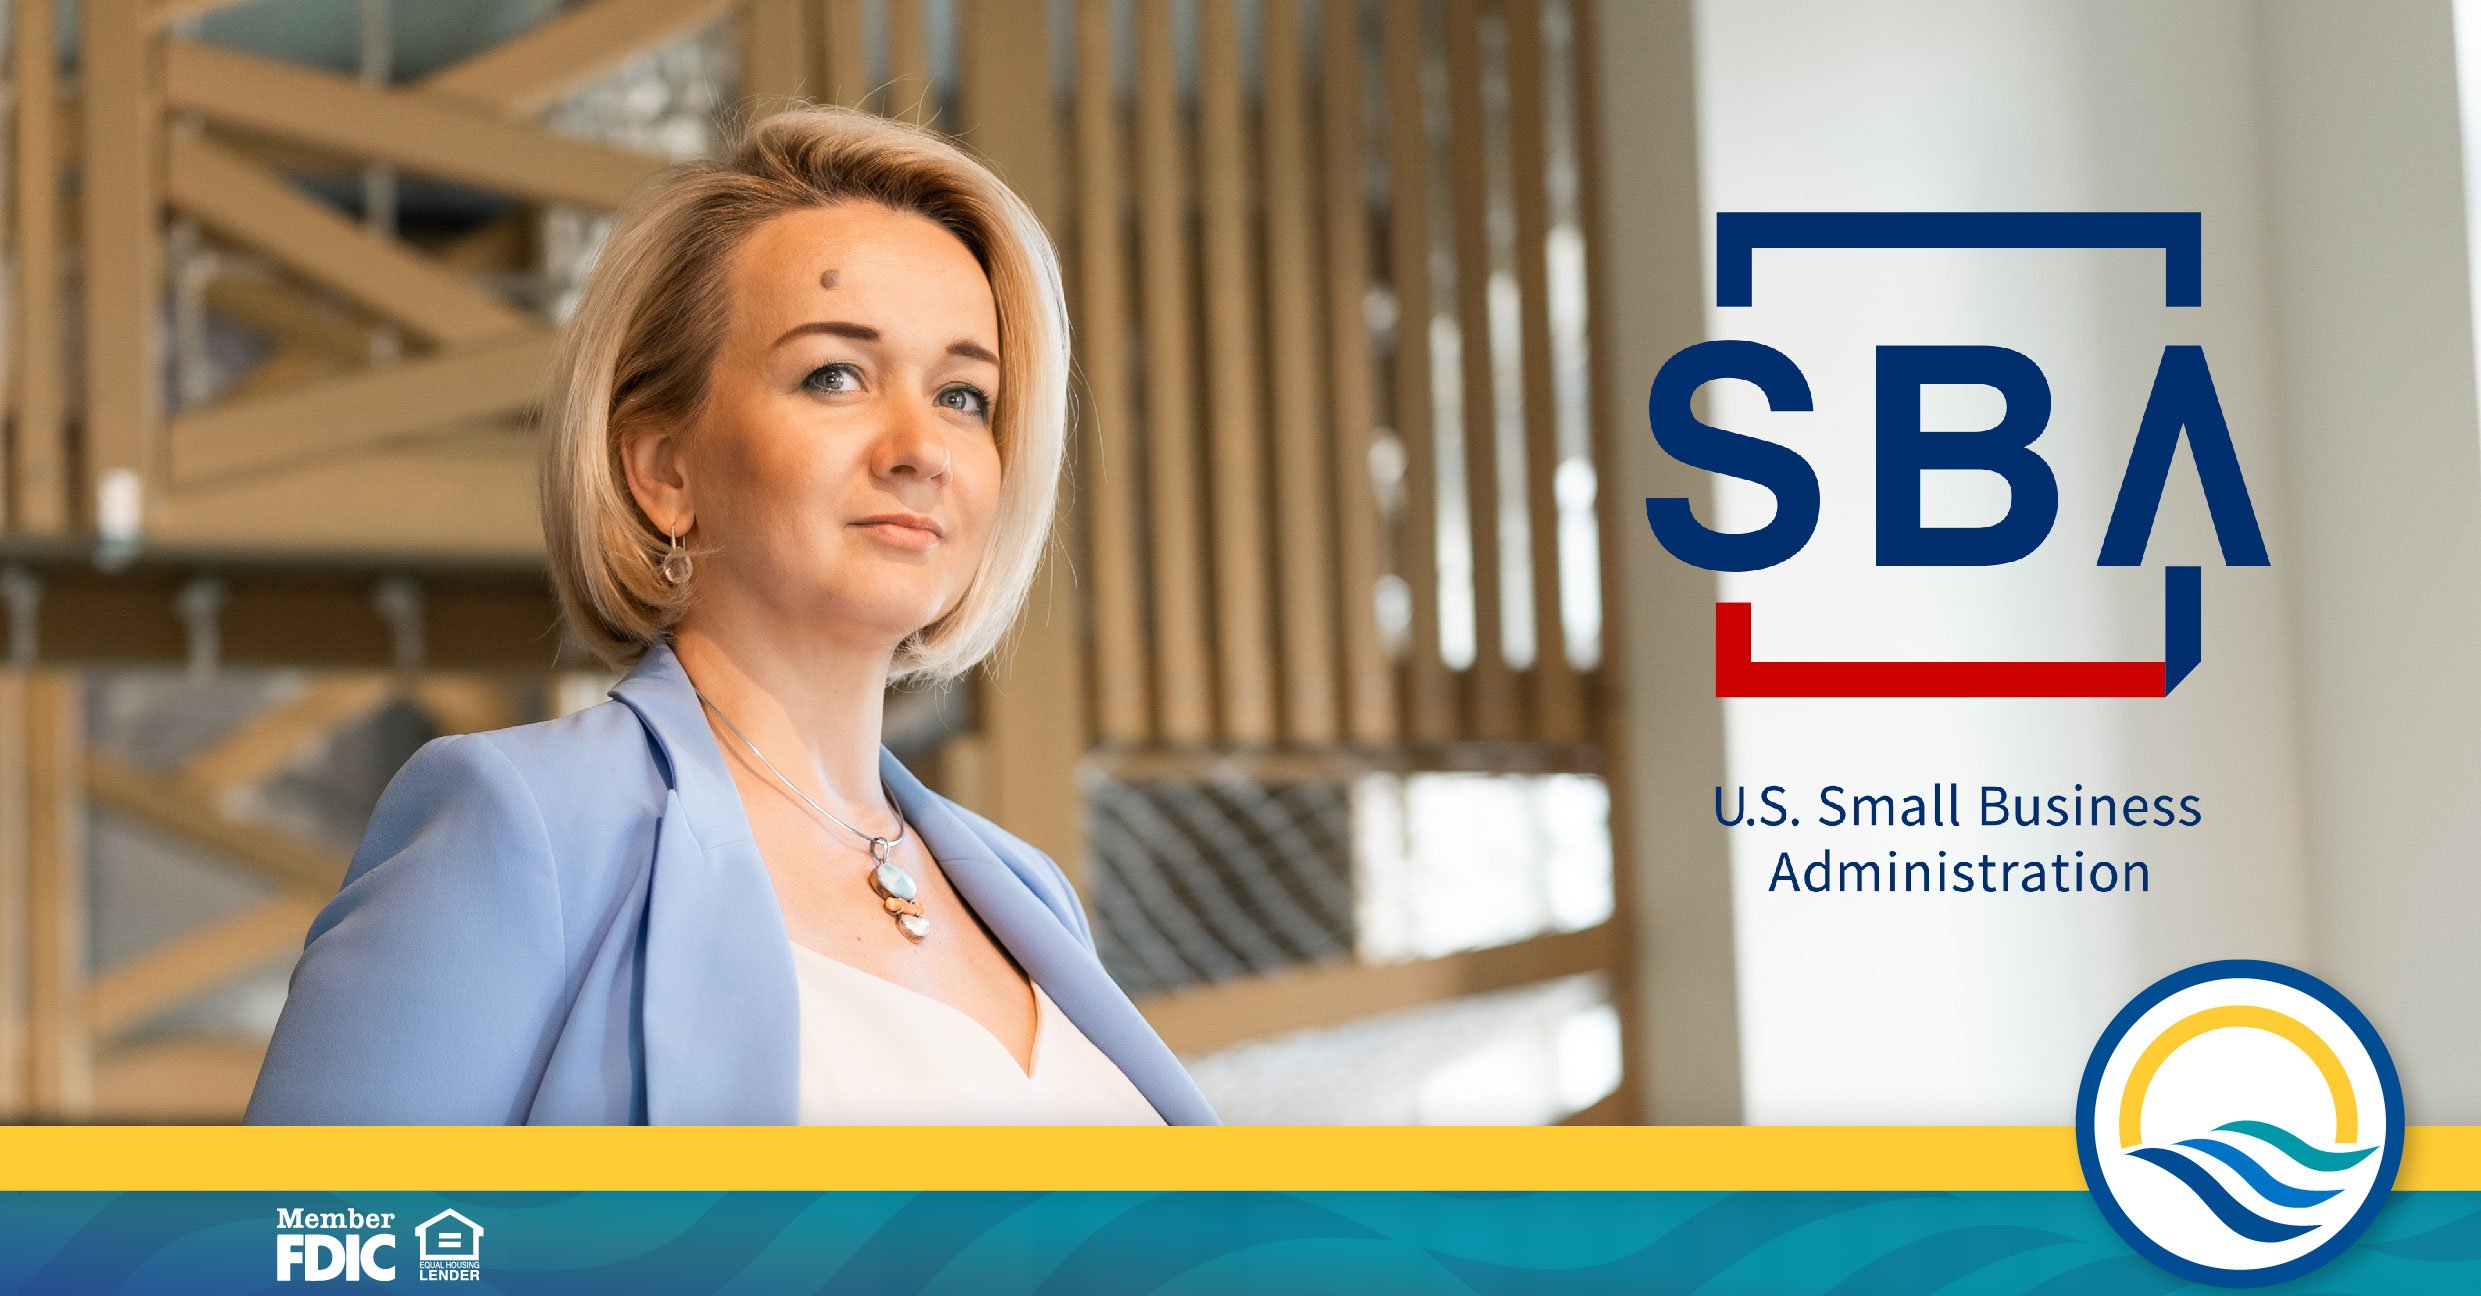 Woman in a business suit looks forward with SBA logo